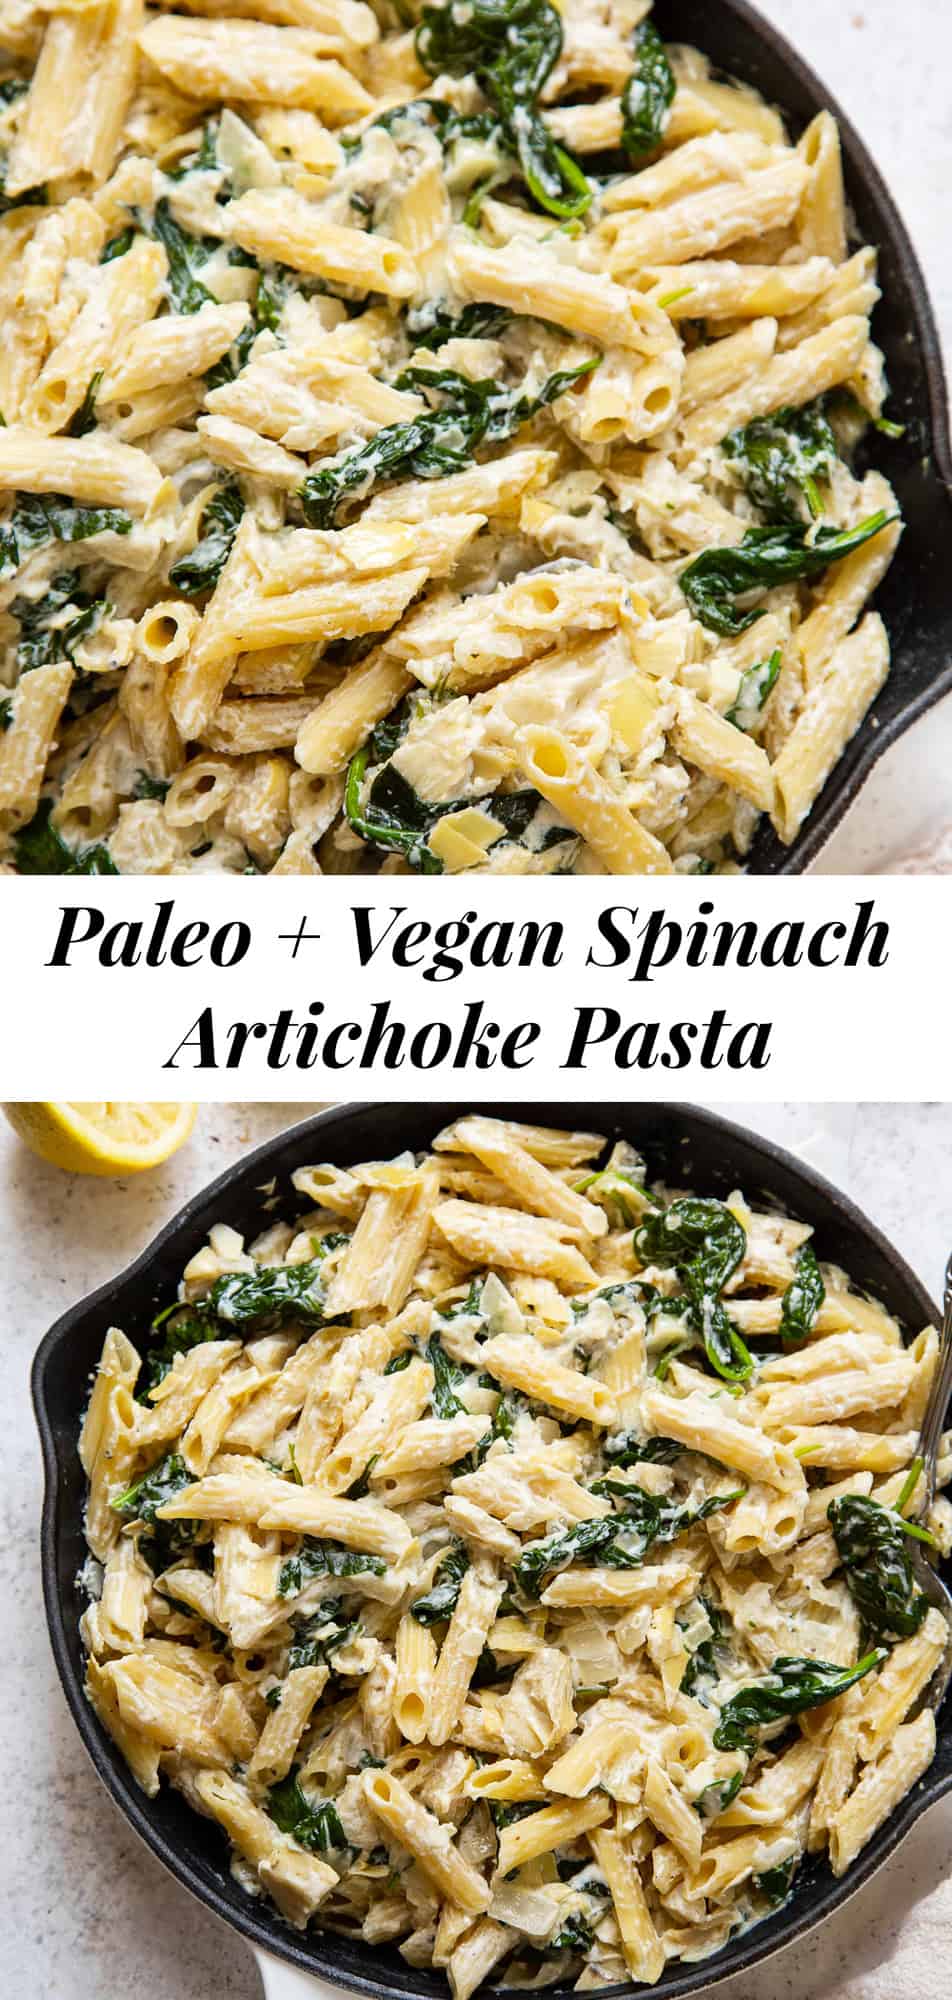 This spinach artichoke pasta is a new favorite of mine! This fast and easy creamy pasta dish is grain free, paleo, dairy free and vegan but you’d never know! Great for quick weeknight dinners and the leftovers are perfect for a next day lunch. #paleo #glutenfree #grainfree #cleaneating #vegan